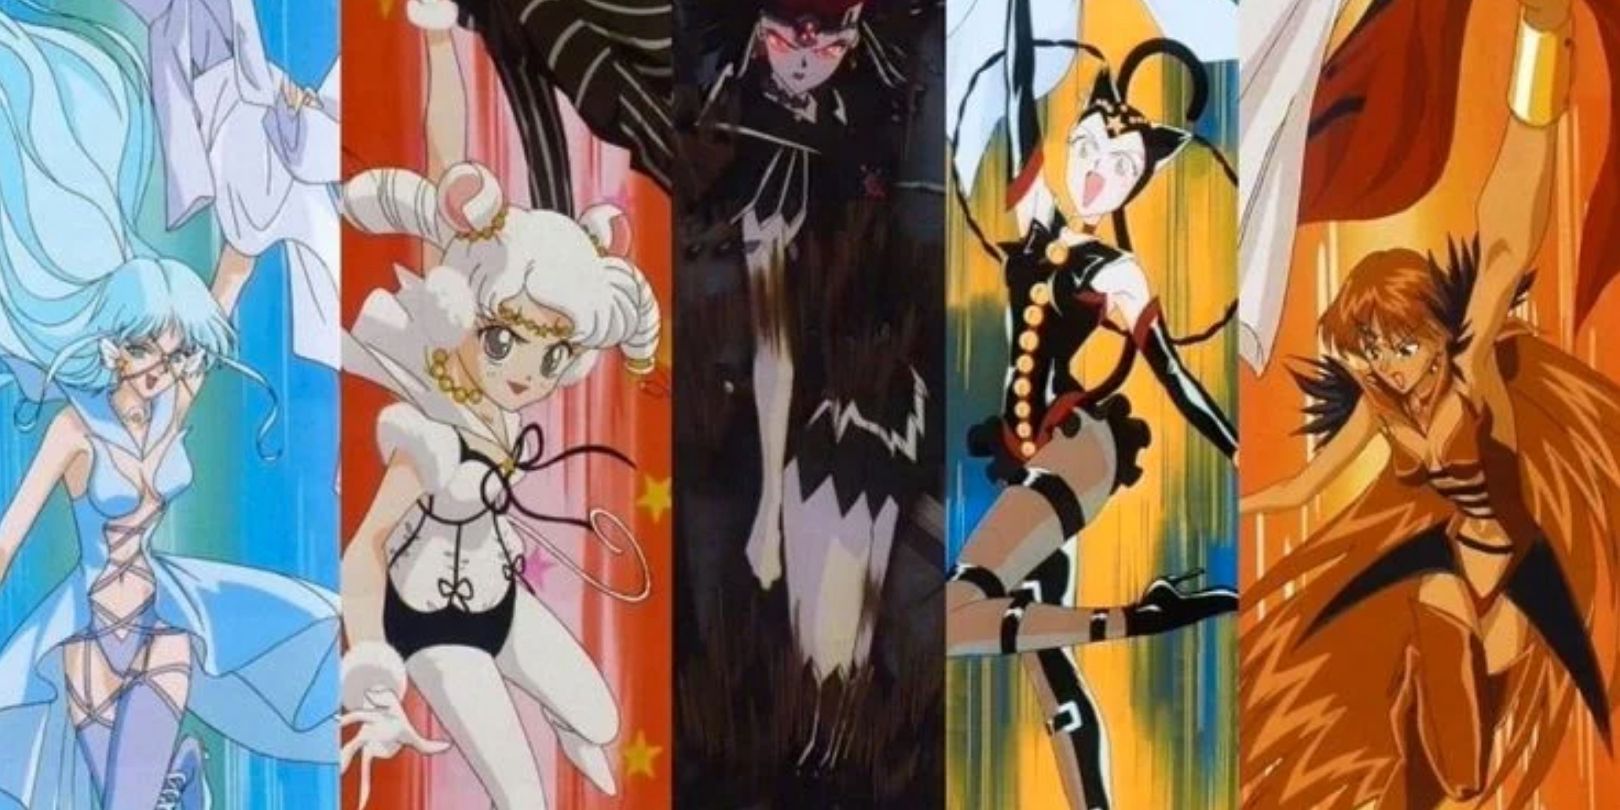 The Sailor Animamates working for Galaxia in Sailor Moon